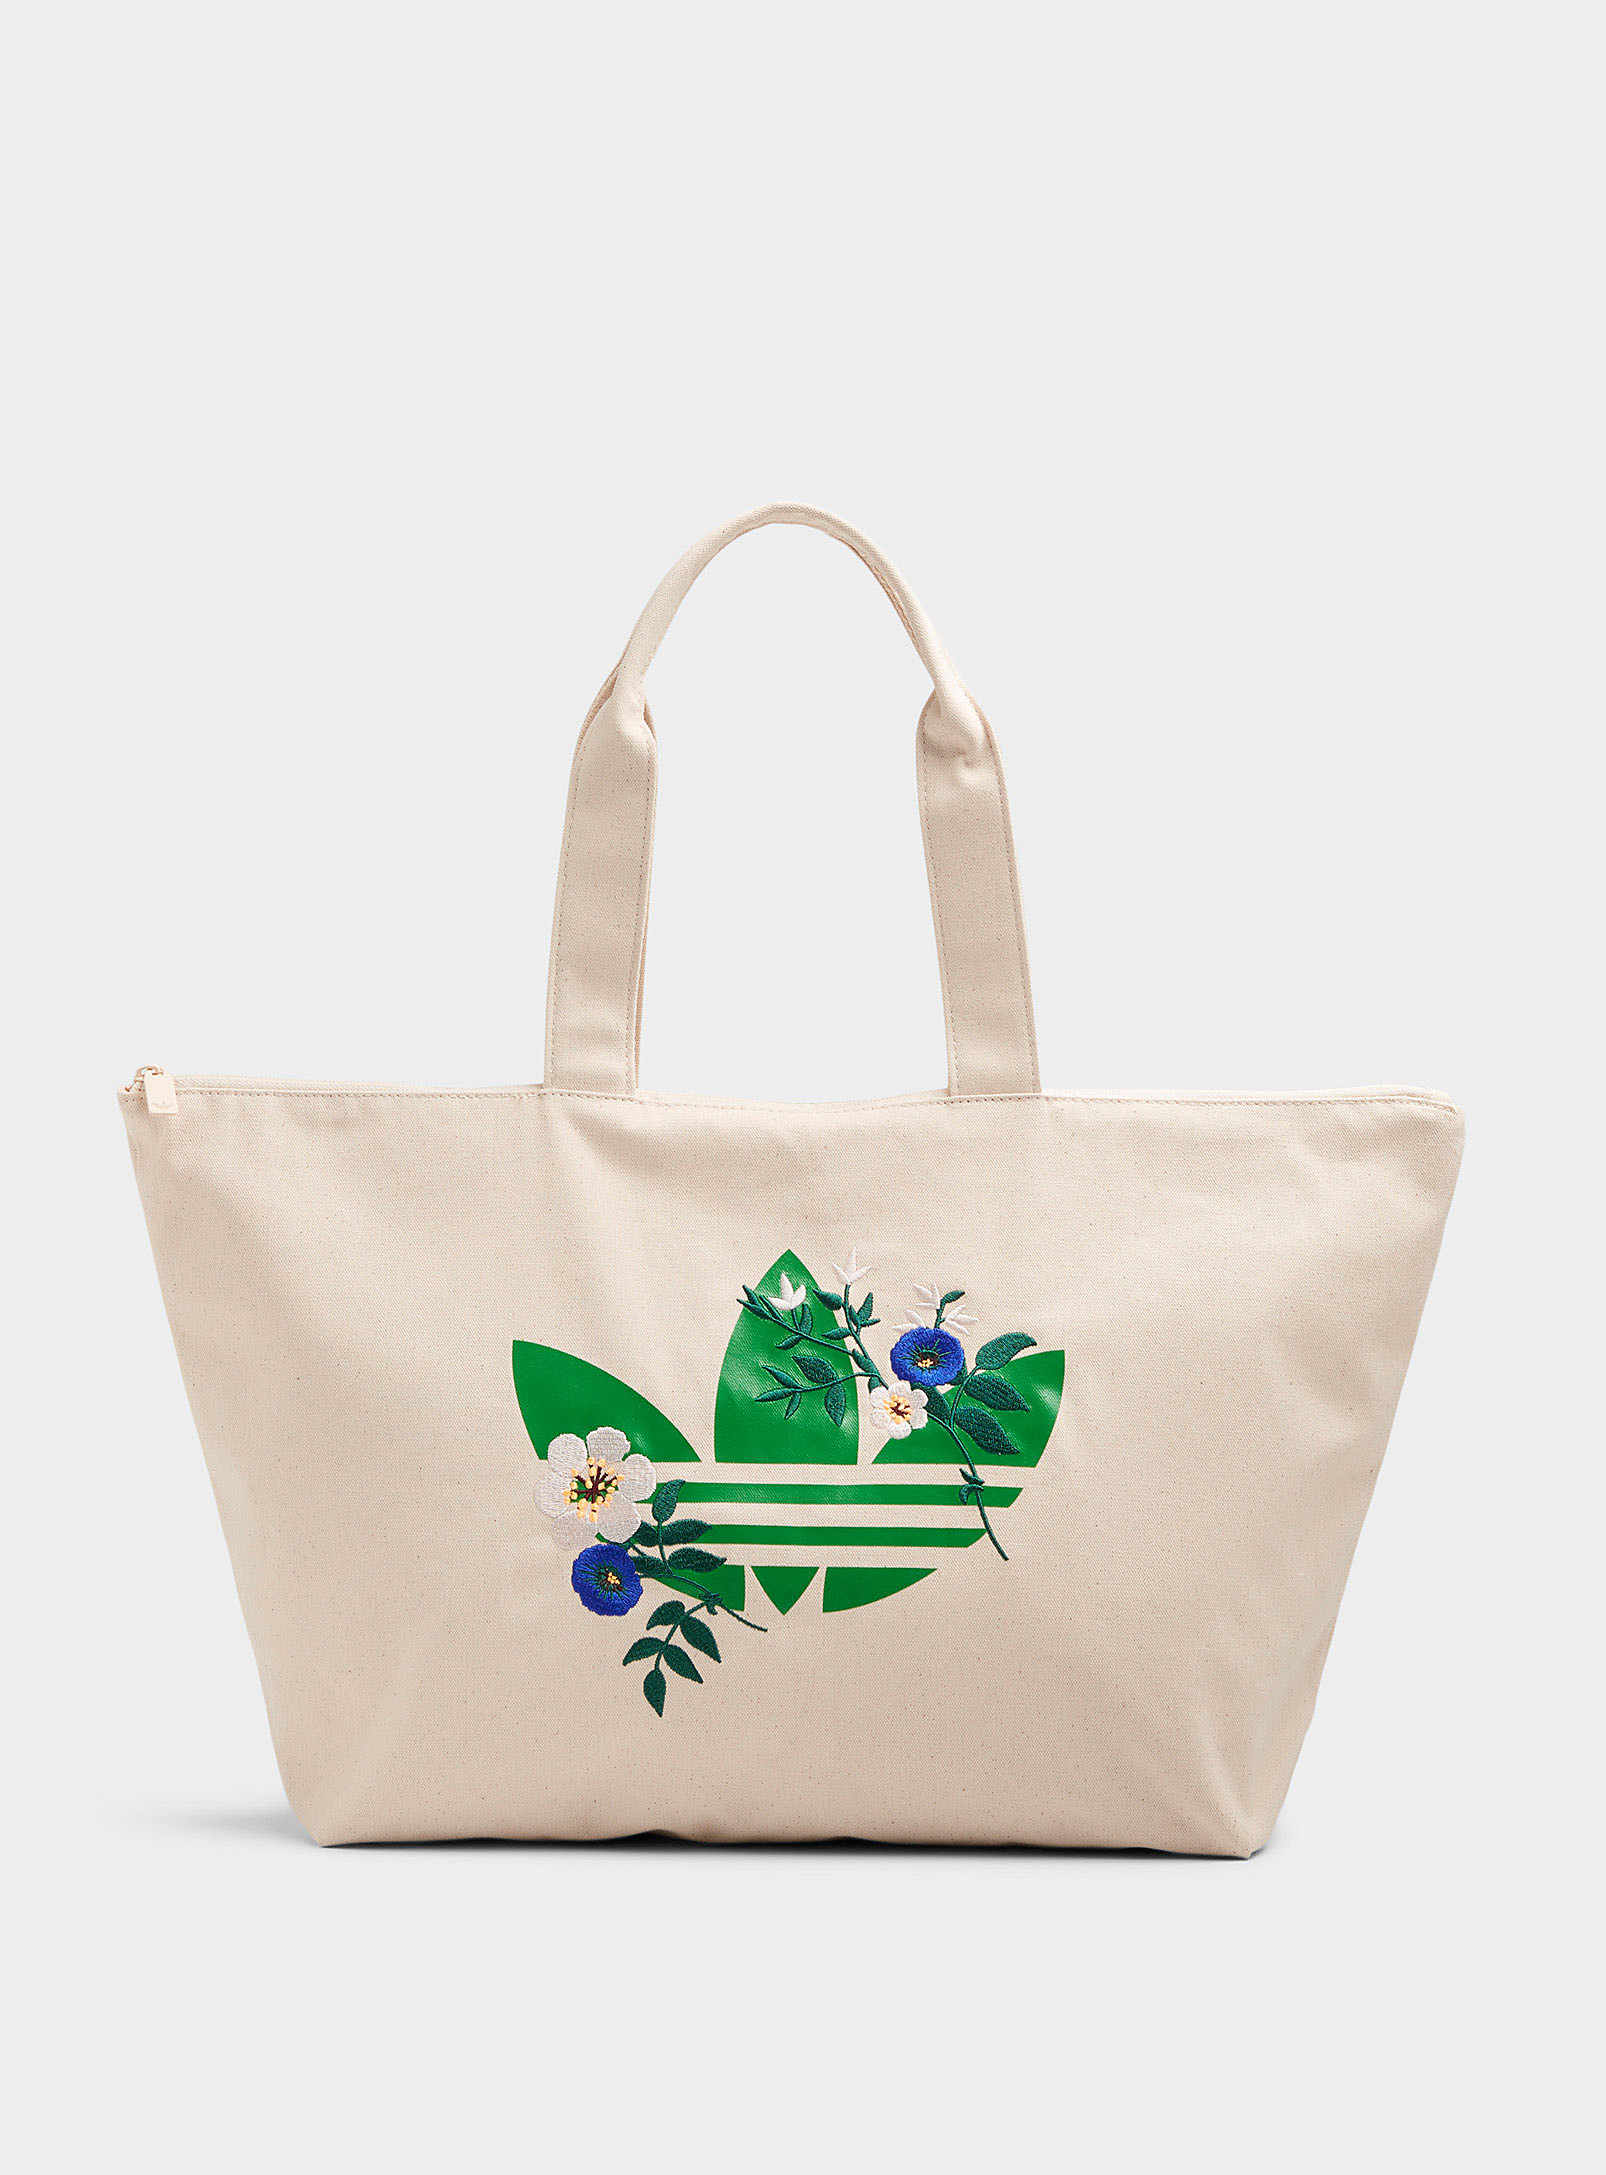 Adidas Originals Embroidered Flower And Signature Clover Tote In Patterned Grey